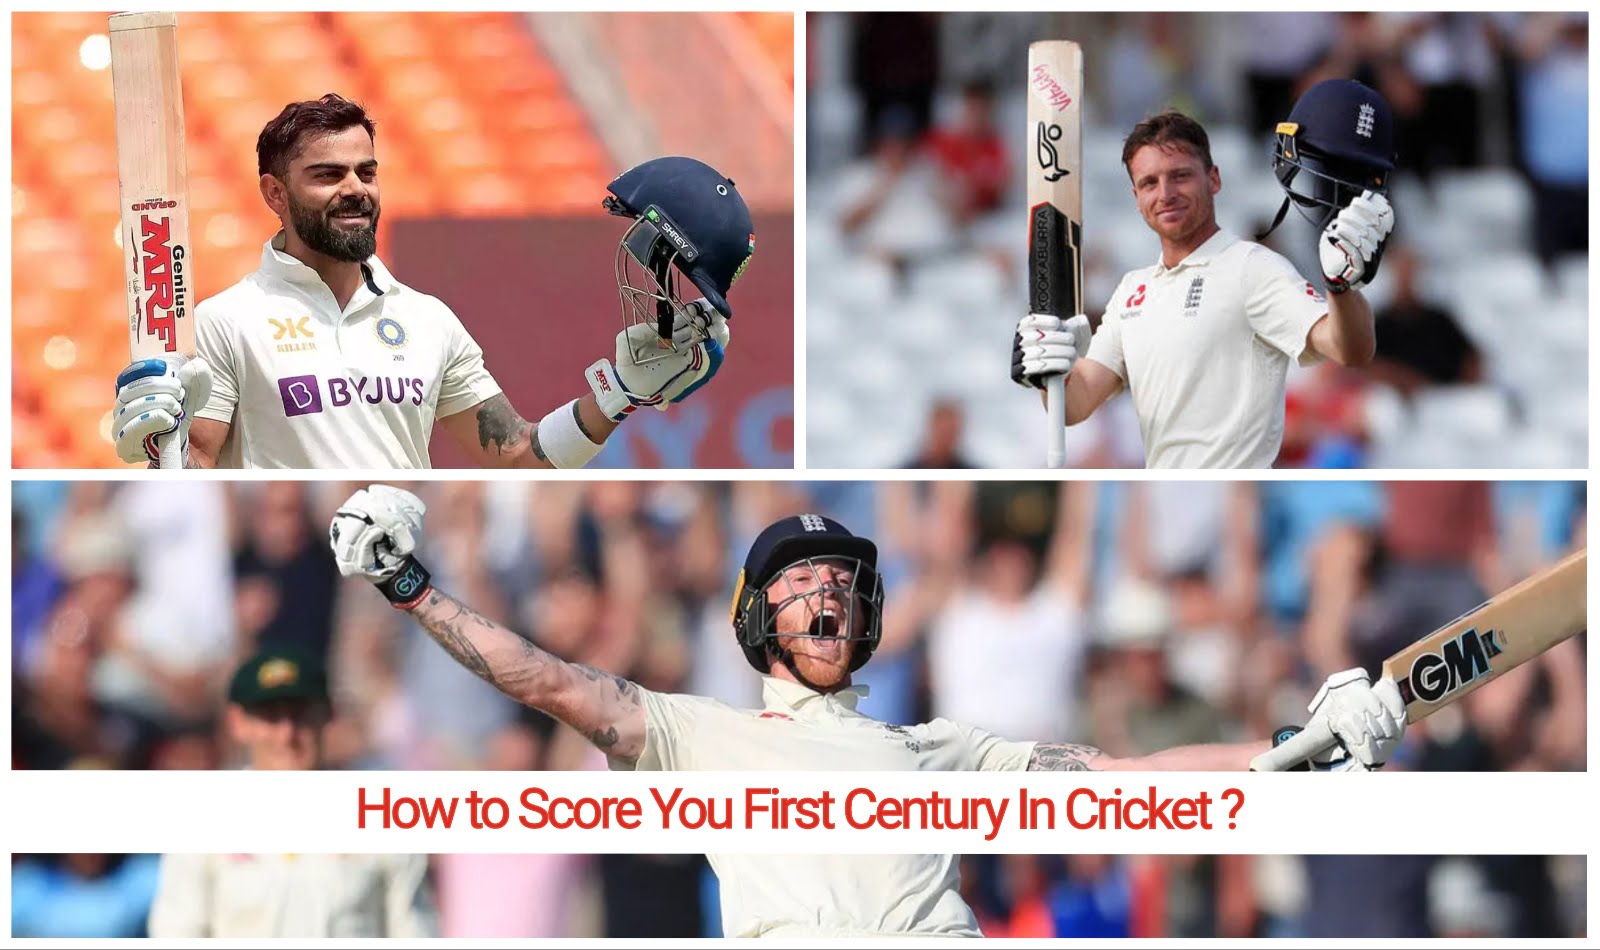 This blog is about how you can score a century in cricket match.